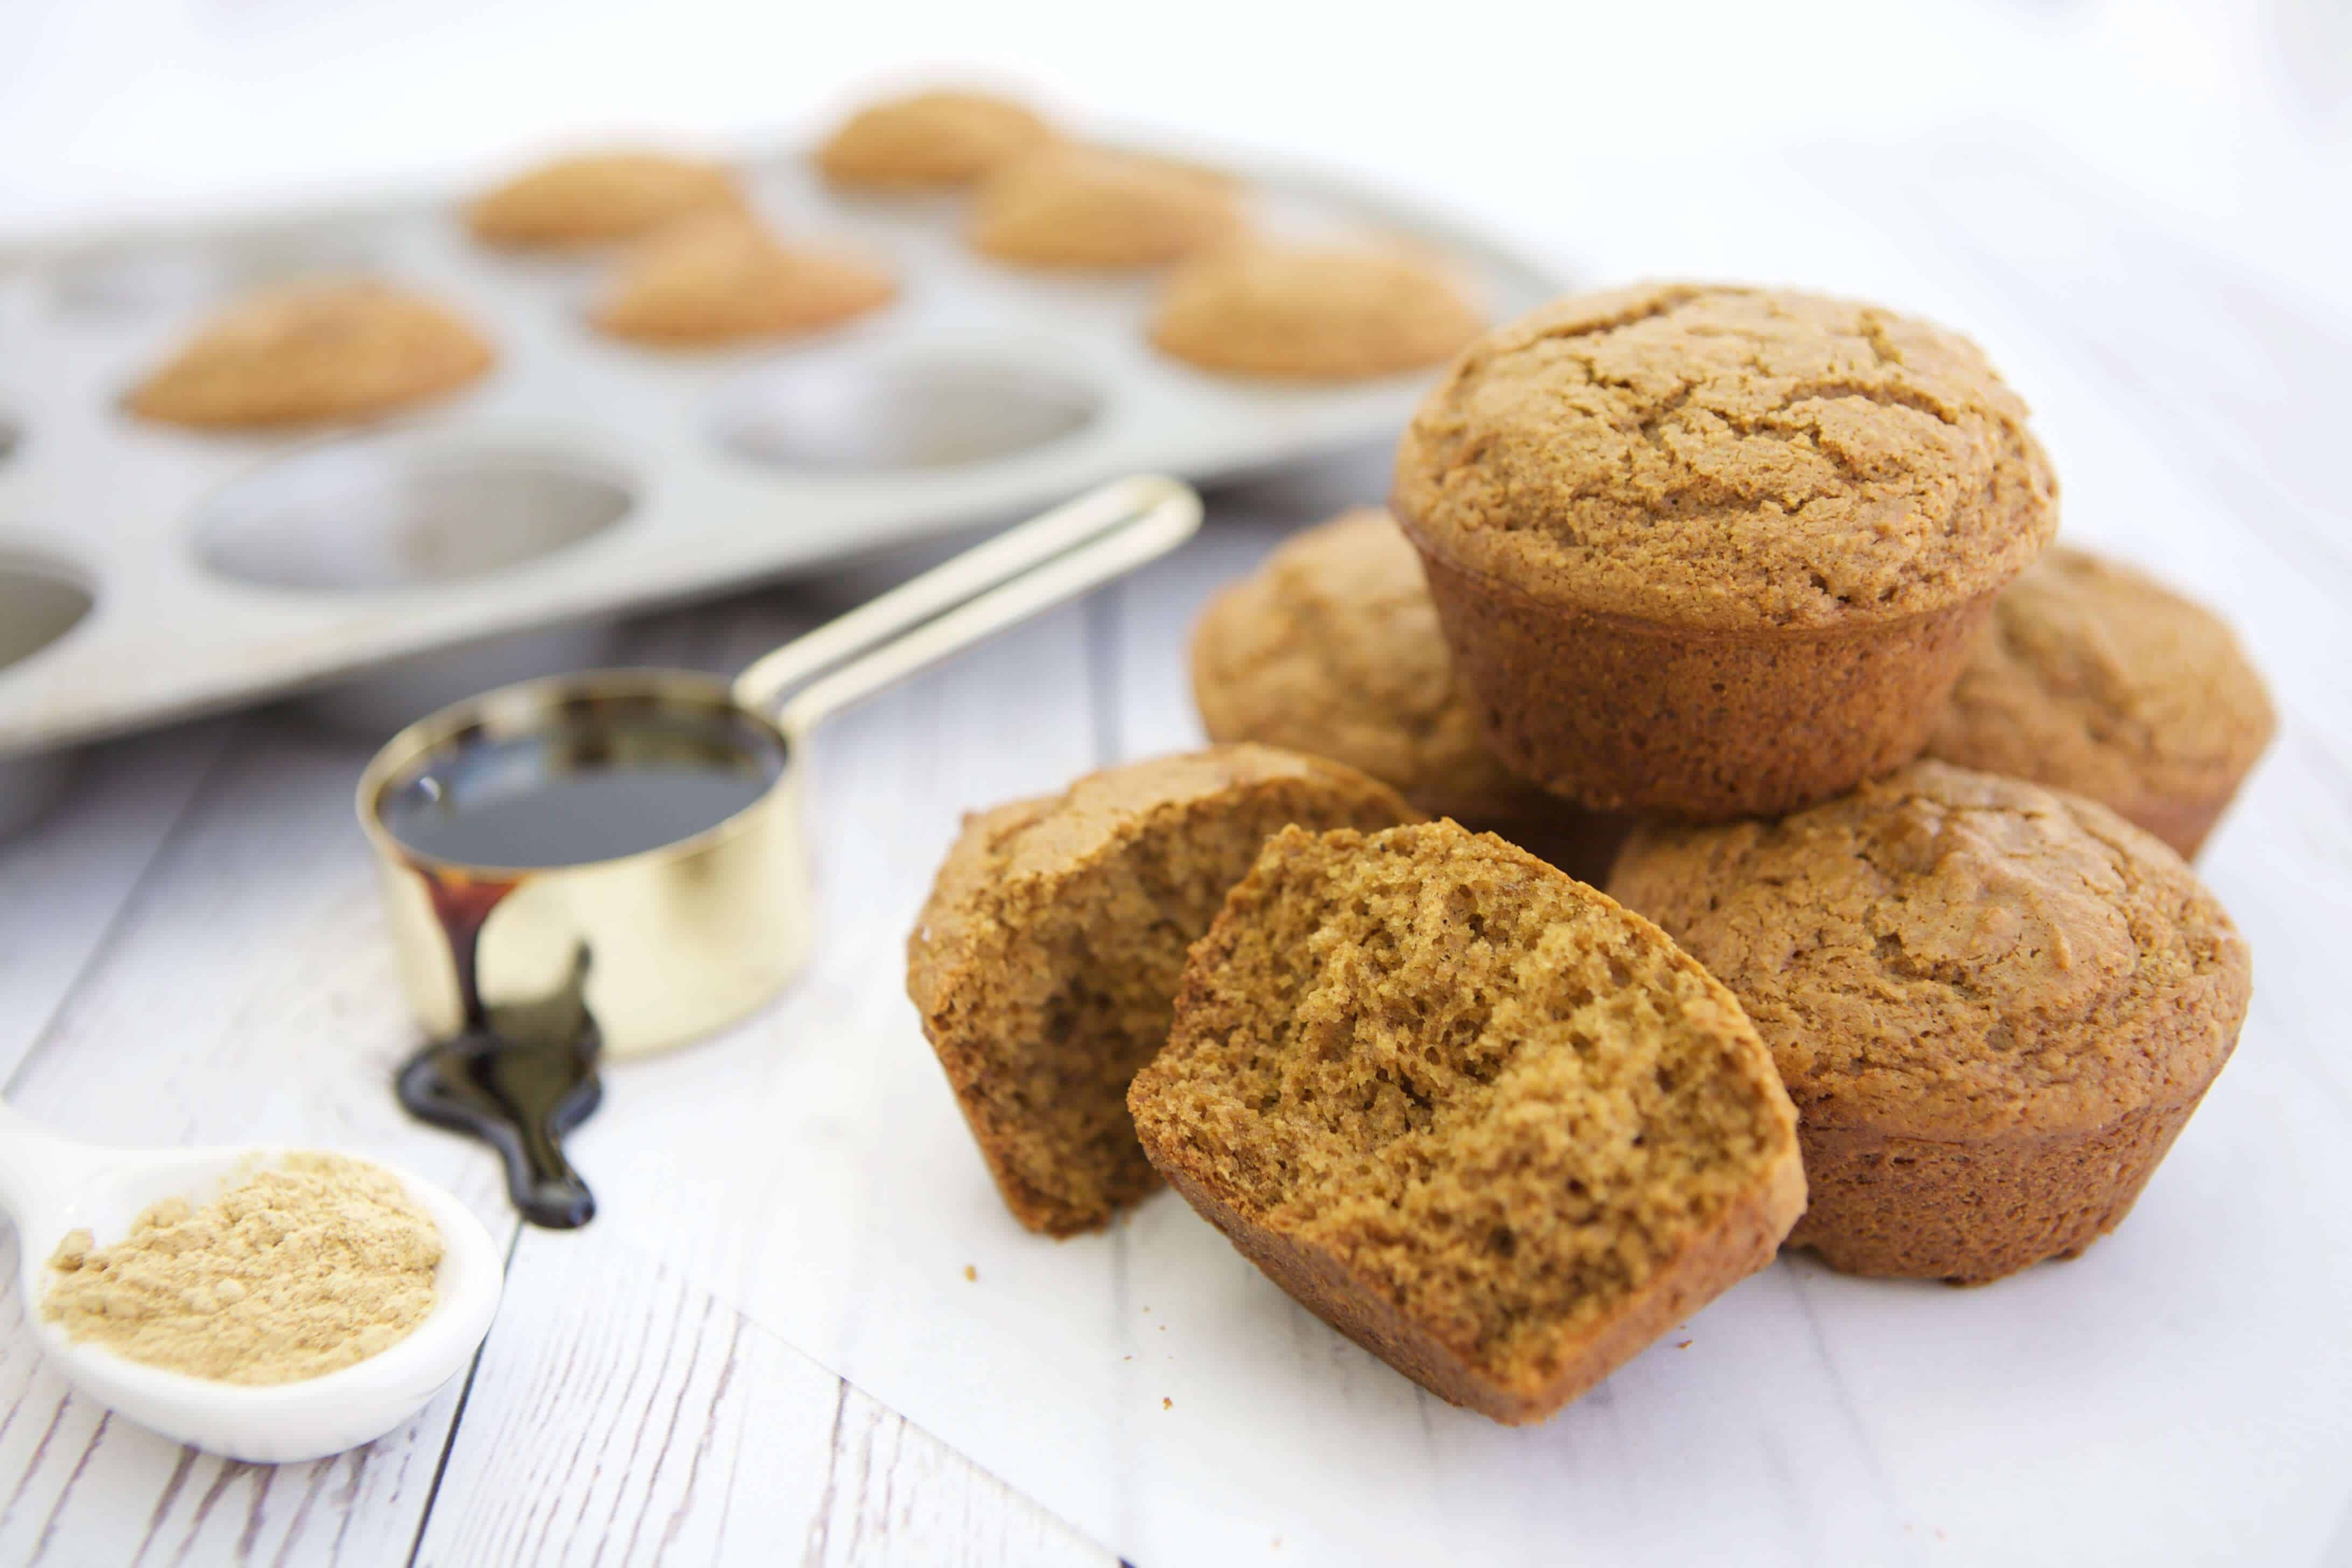 If you love gingerbread and want a lighter, healthier gingerbread recipe to enjoy it all year round, try these fluffy Whole Wheat Gingerbread Muffins.